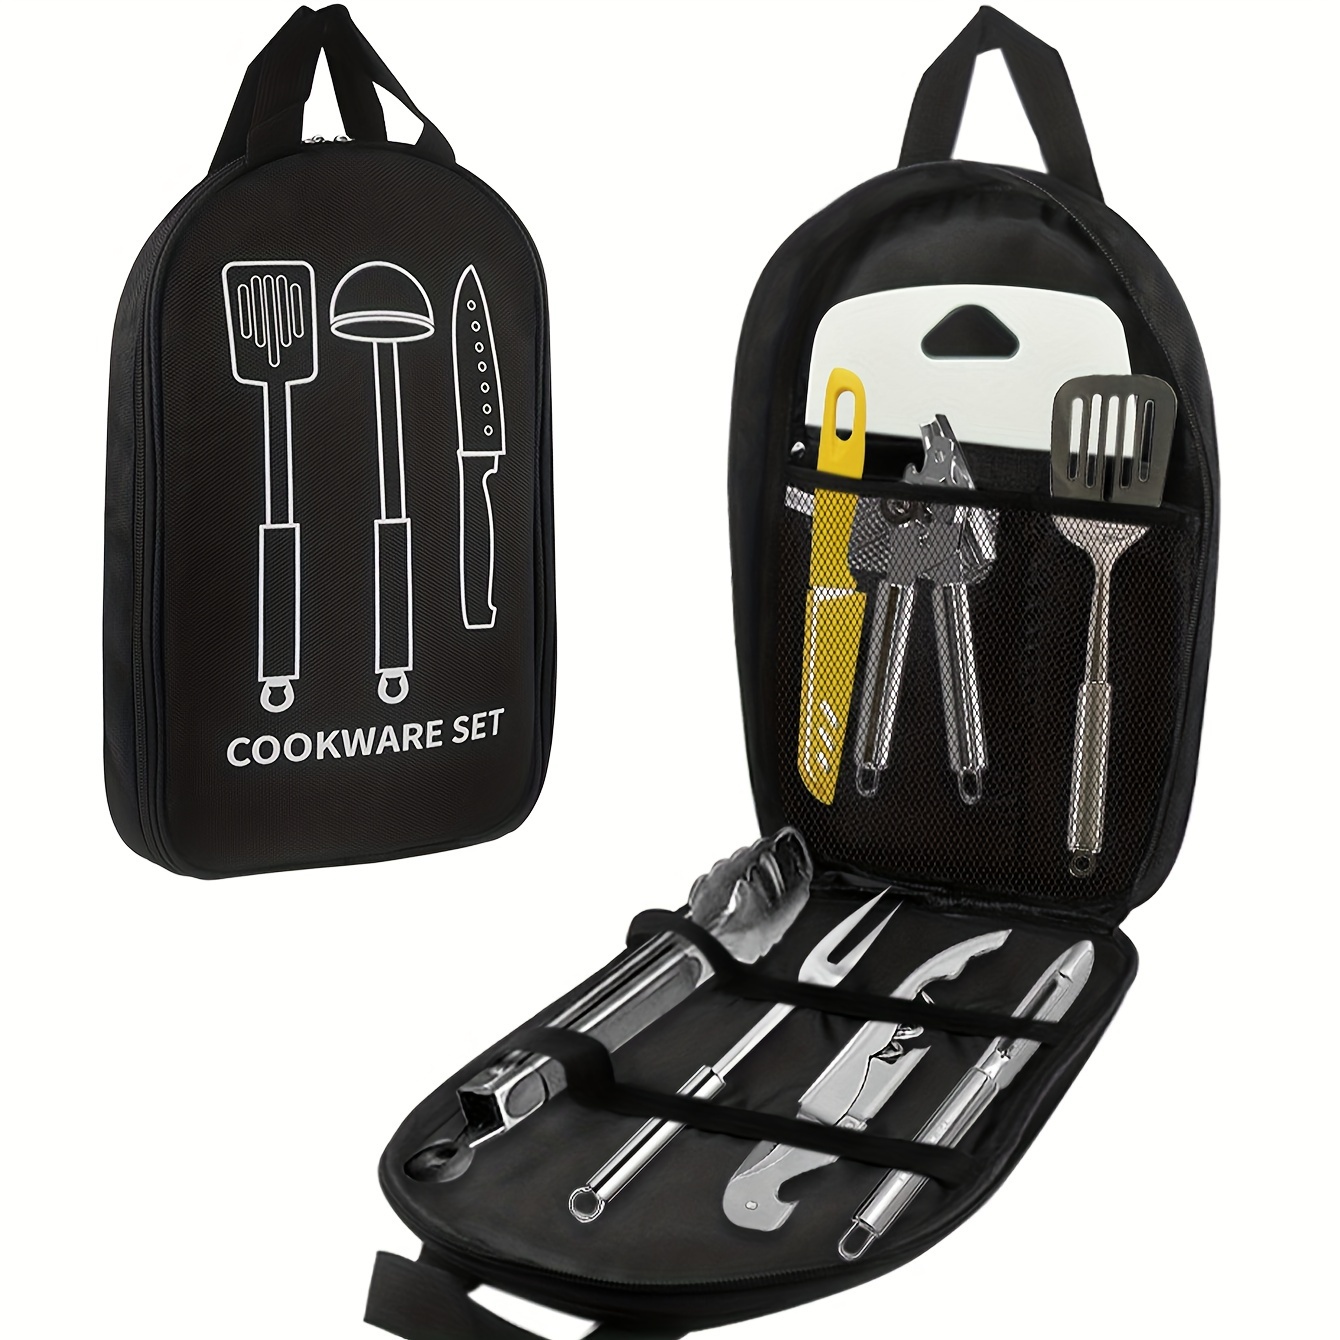 

Portable Outdoor Cookware Organizer - Multifunctional Camping Utensil Storage Bag (knife & Fork Not Included)